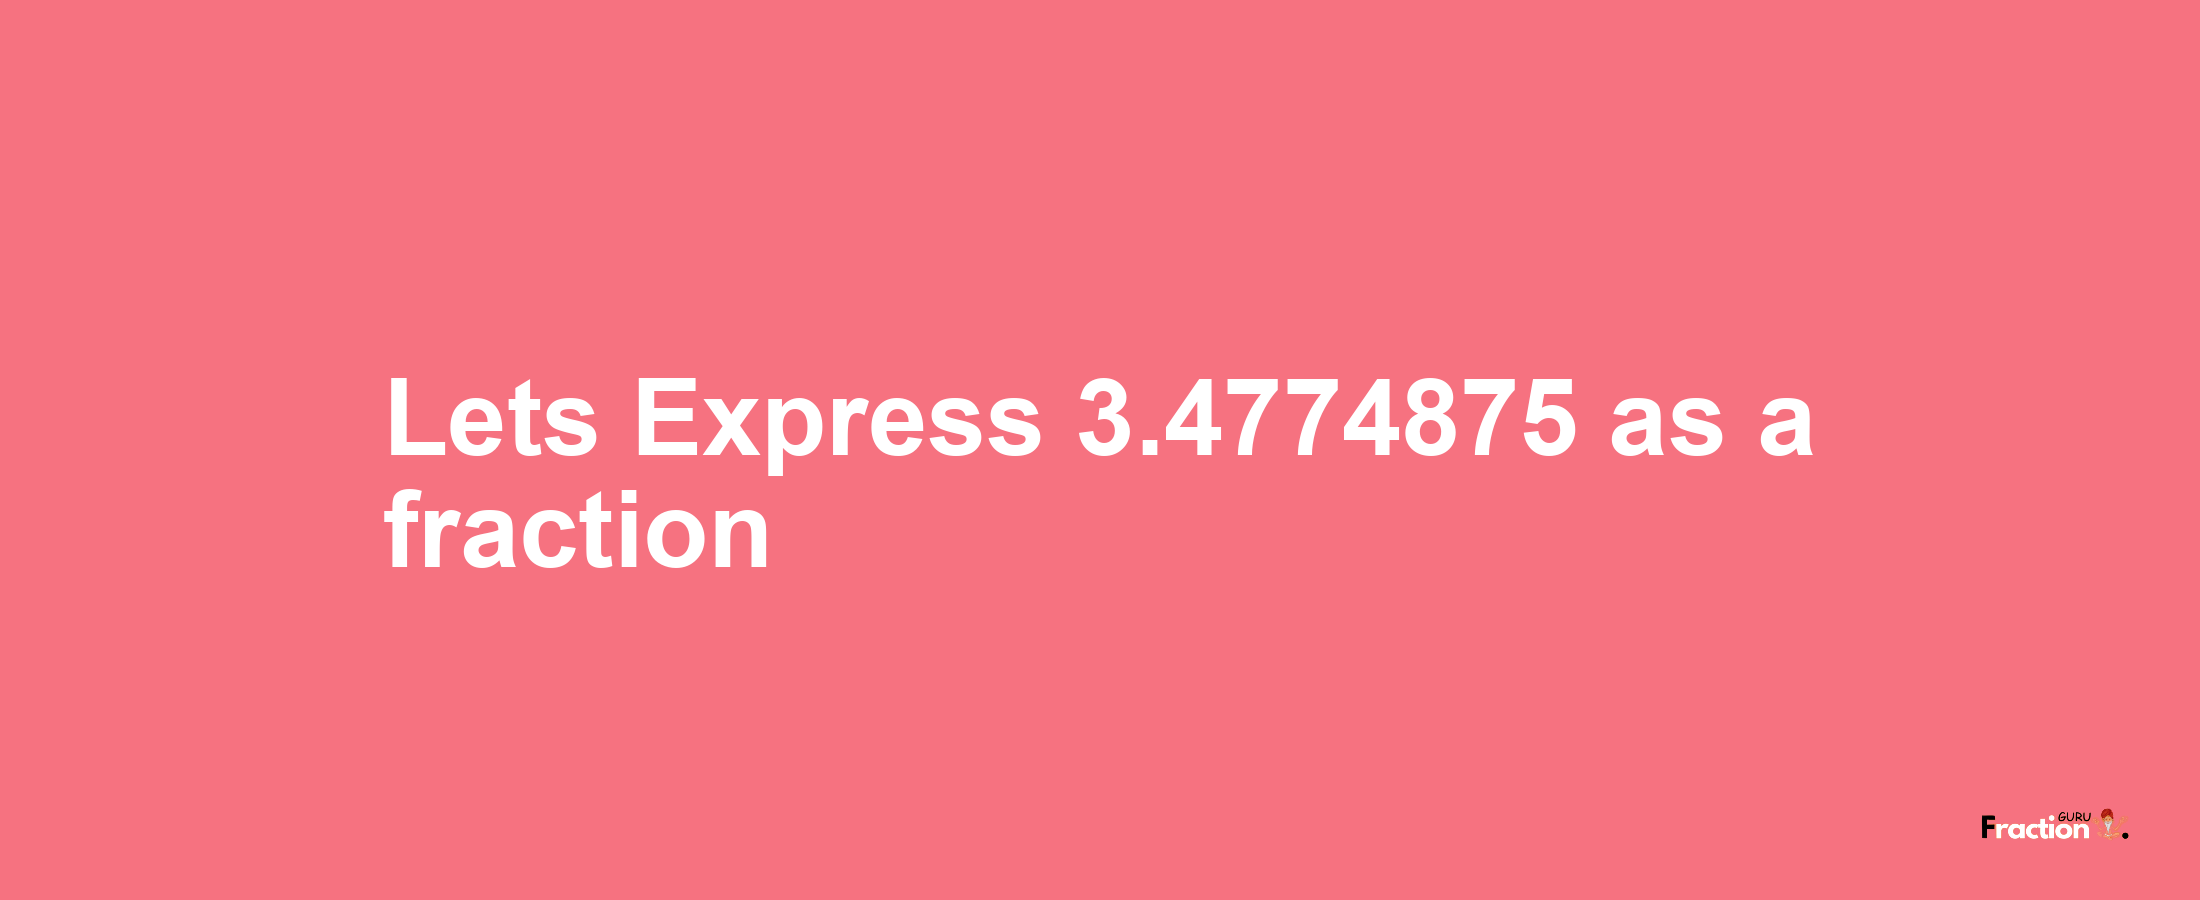 Lets Express 3.4774875 as afraction